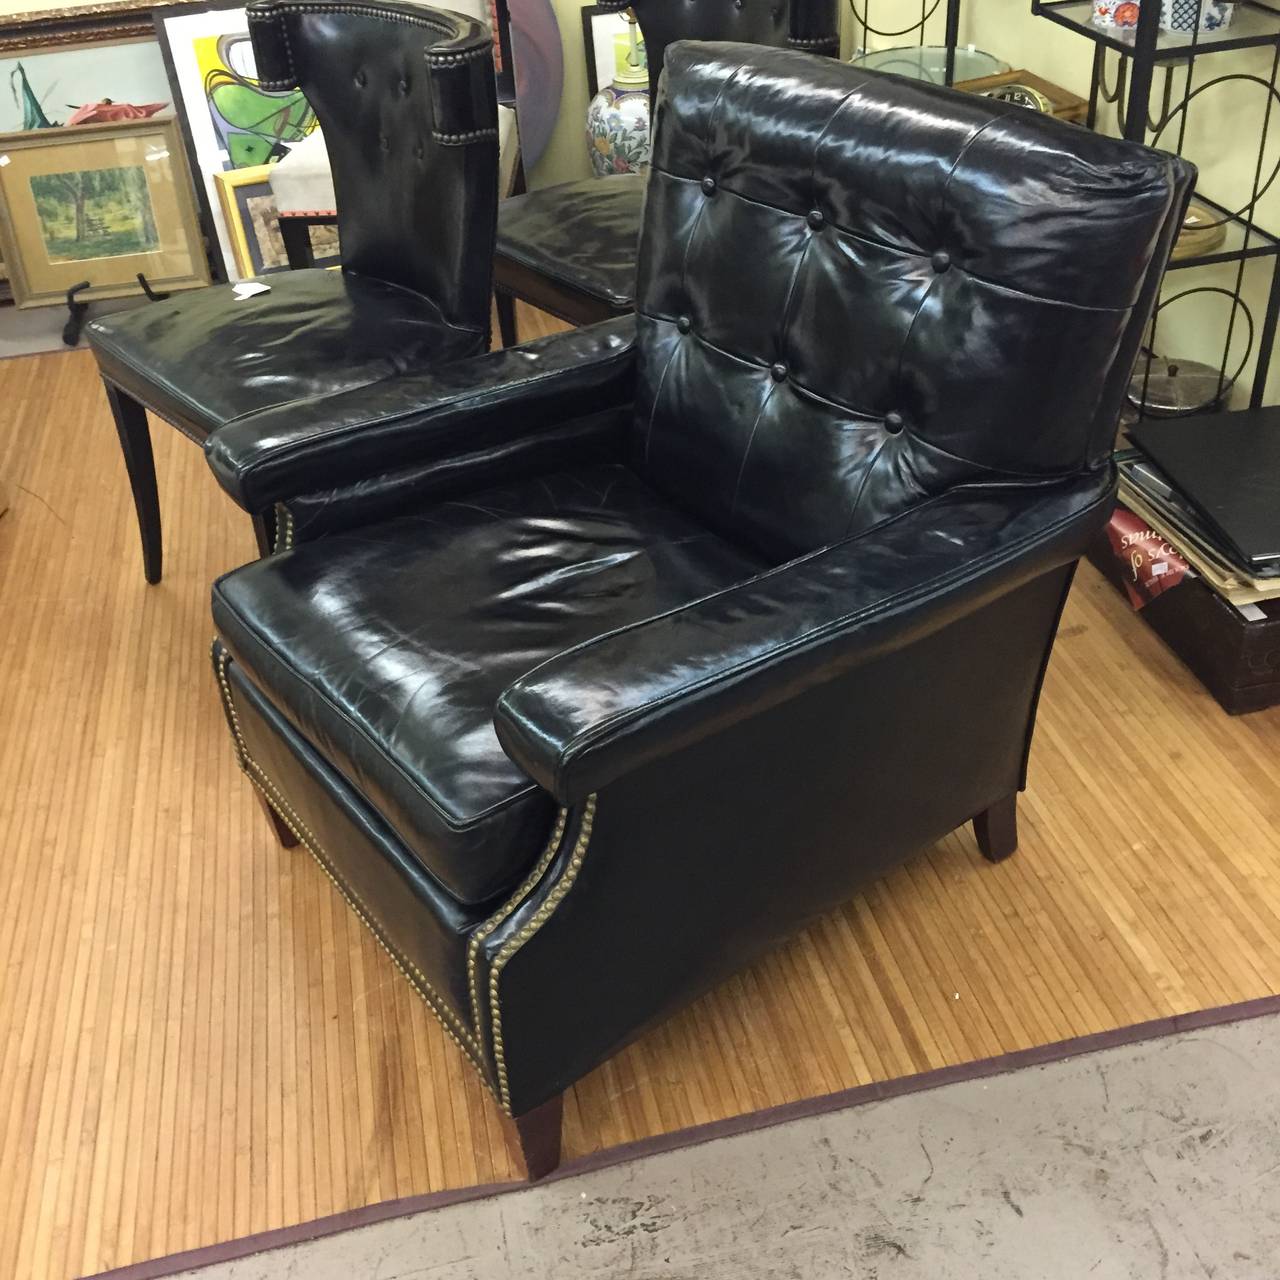 A very nice patent leather lounge chair or miniature wing chair. It features nailhead trim and wood legs. It is in original condition with some splits to the leather seat and abrasions to the leather which are pictured. There are some nicks and